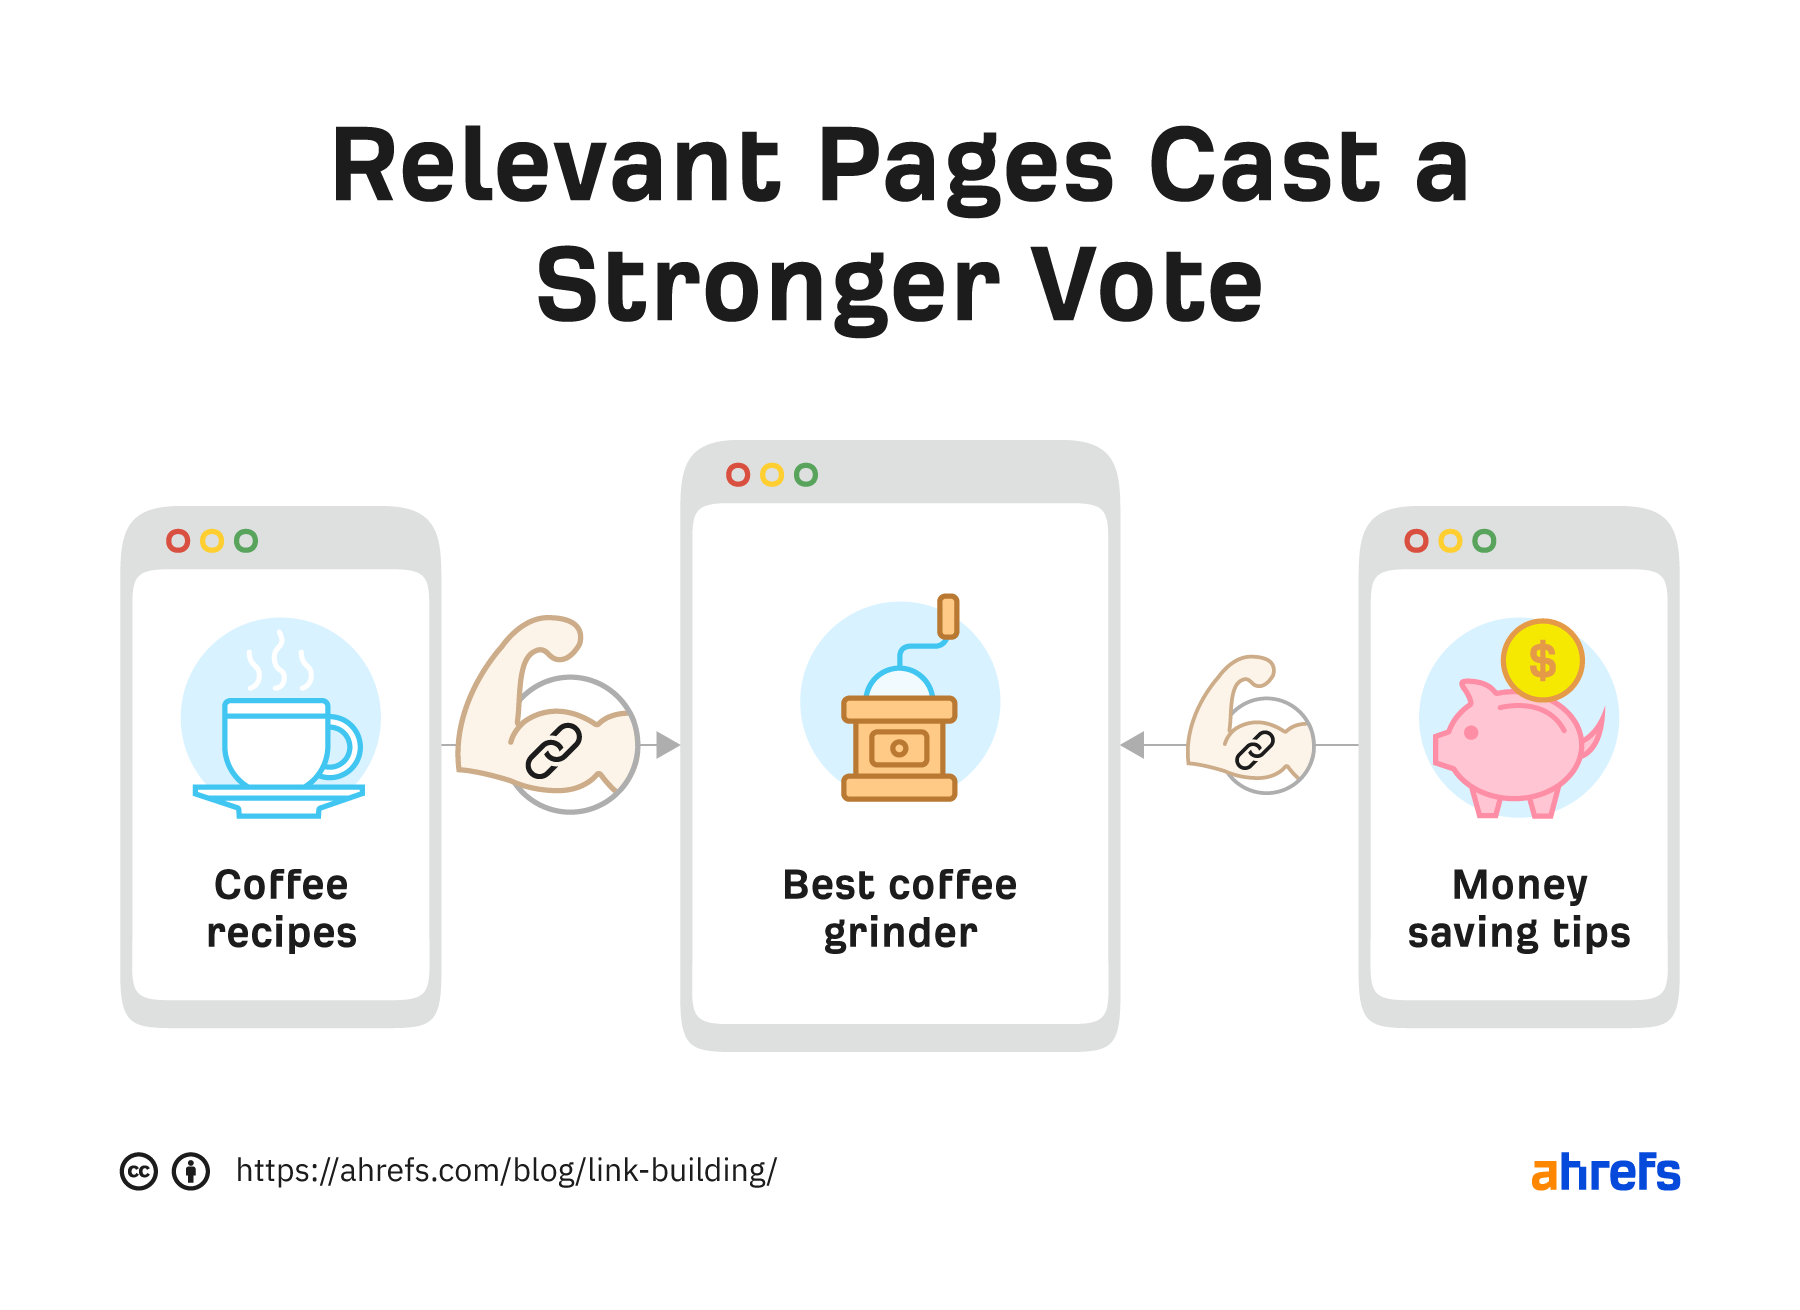 Link building for topical authority—relevant pages cast a stronger vote
